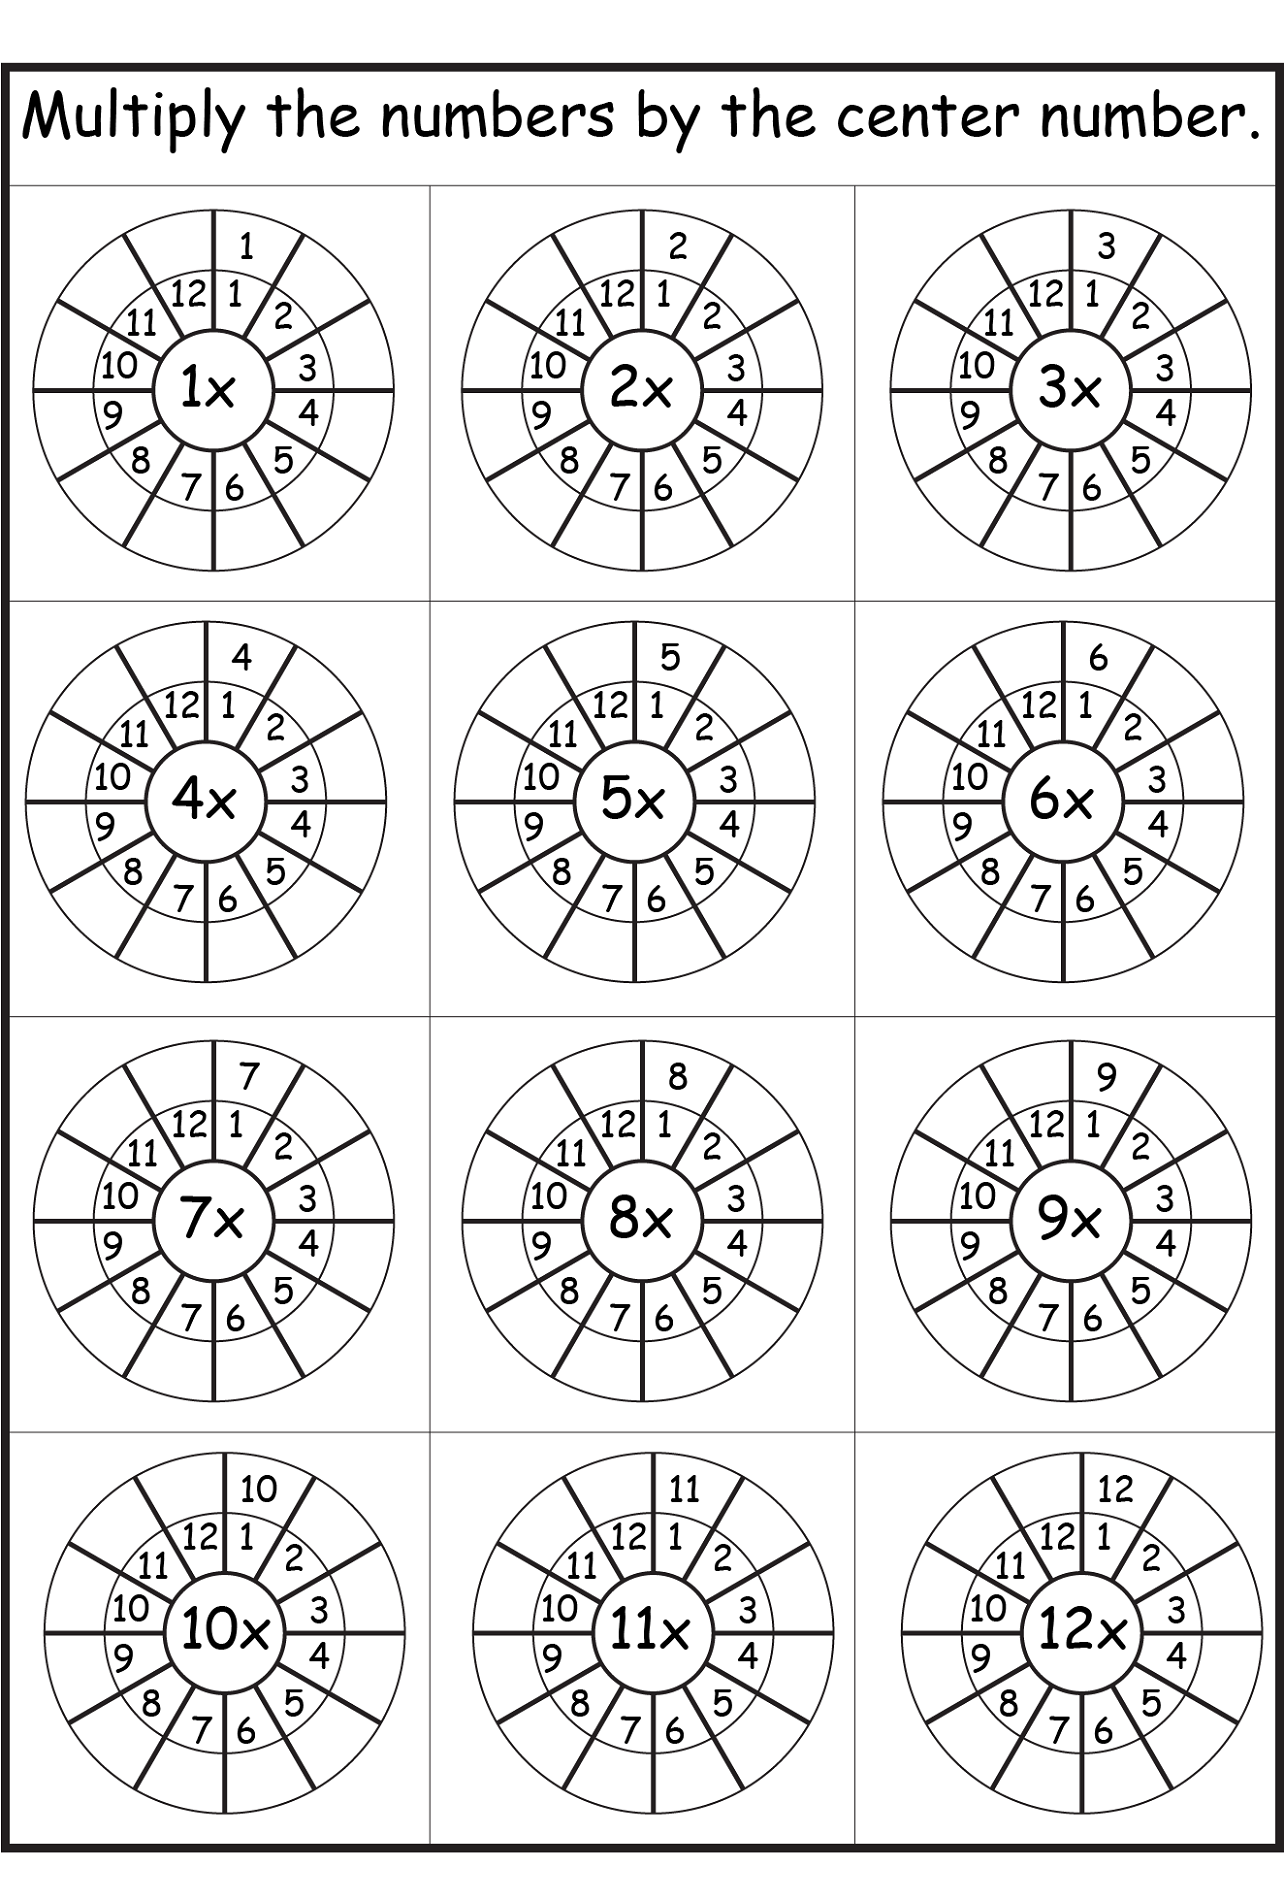 8 Times Table Multiplication Wheels